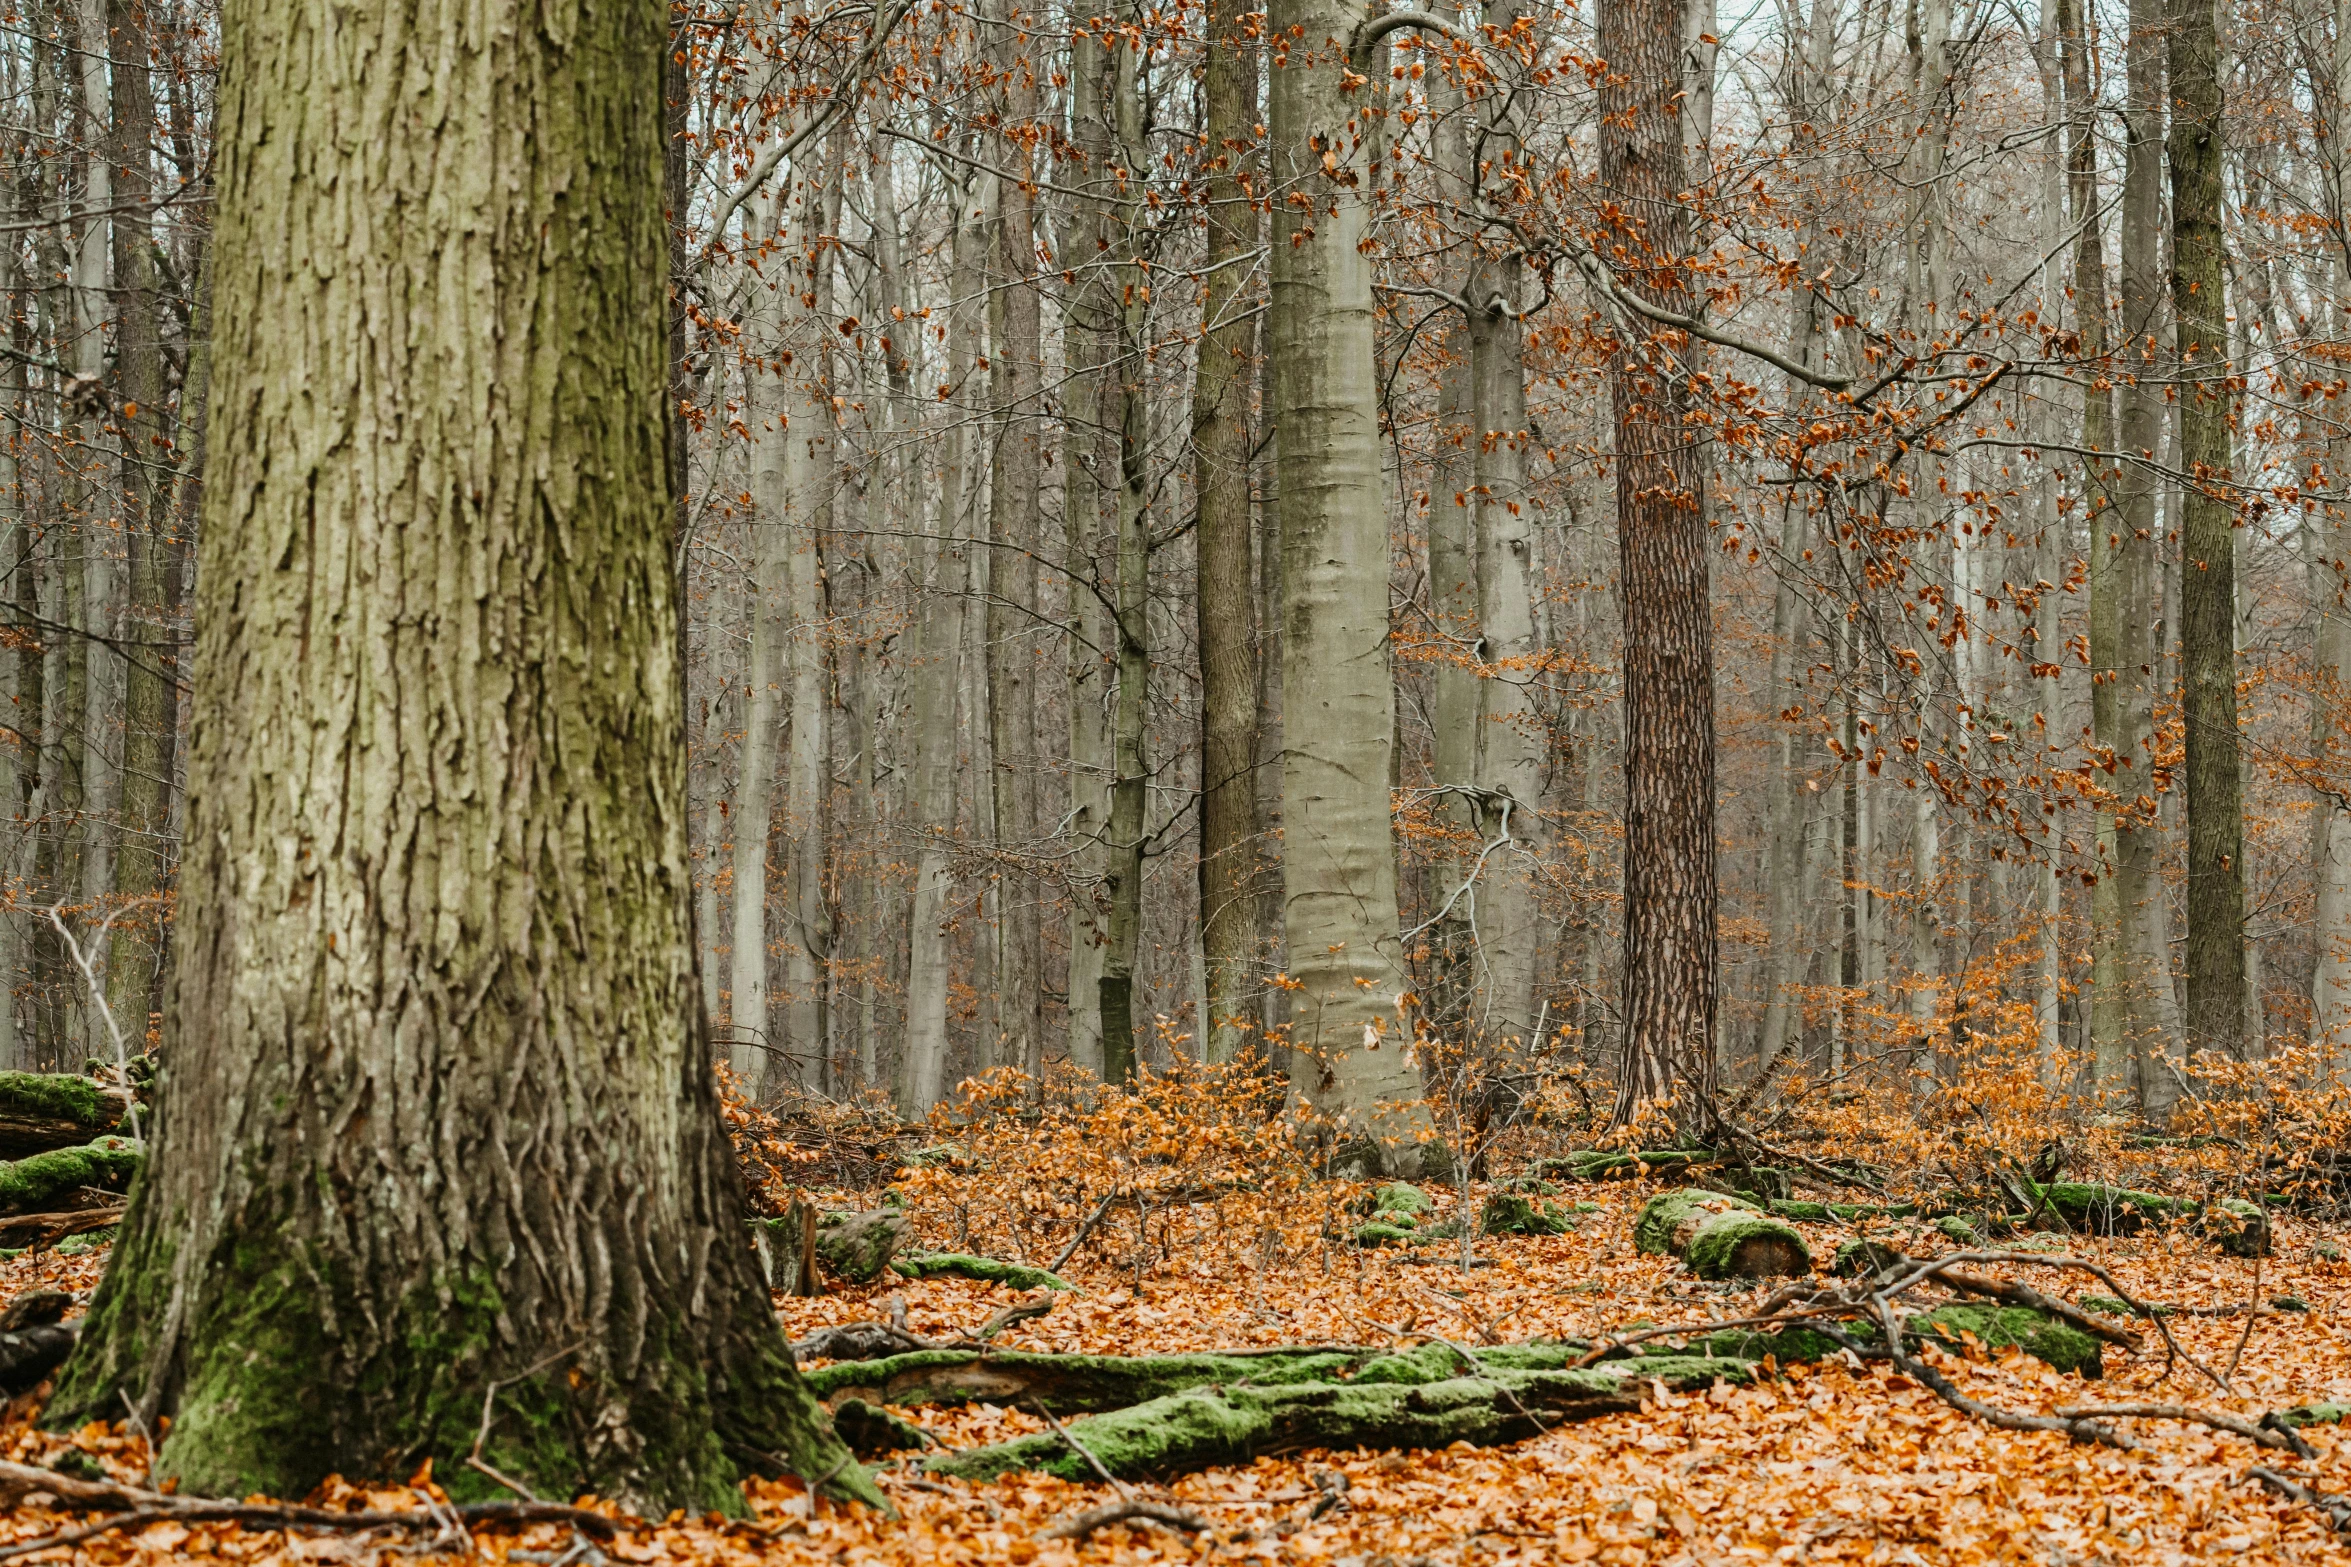 a thick forest with fallen leaves on the ground